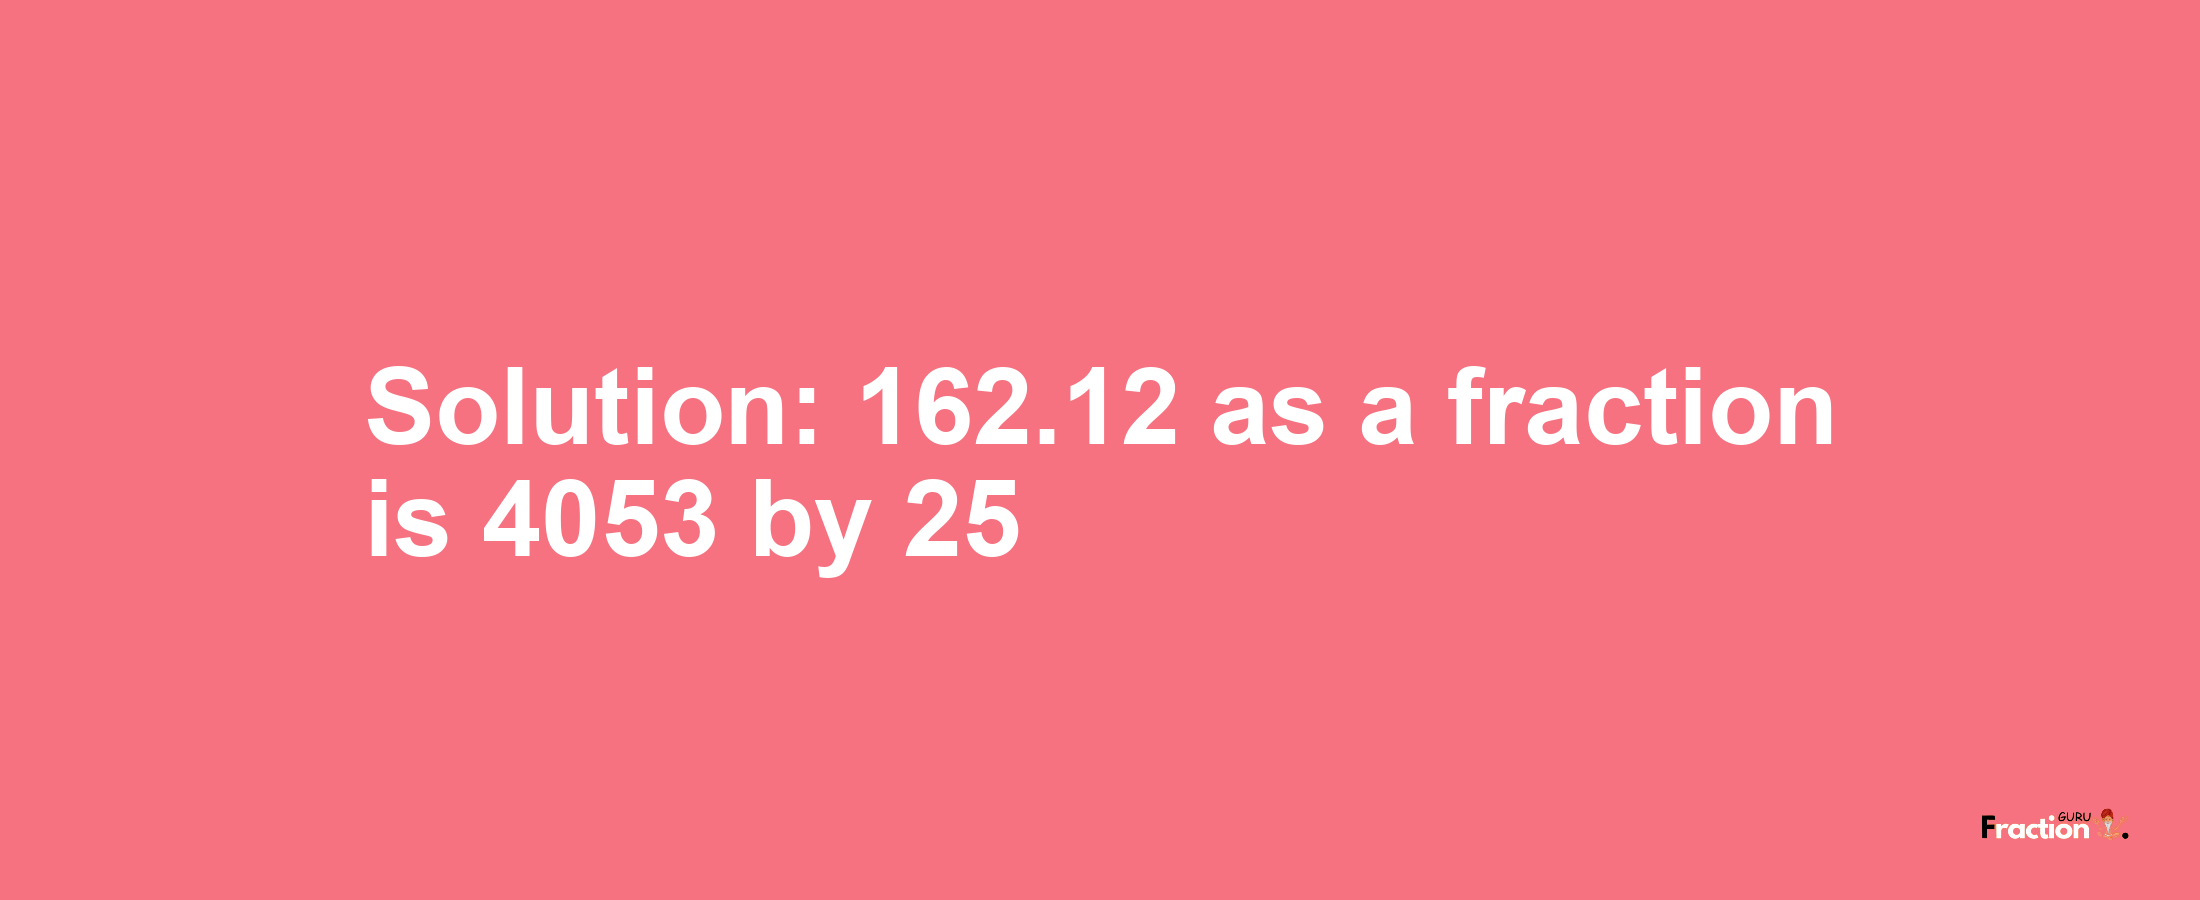 Solution:162.12 as a fraction is 4053/25